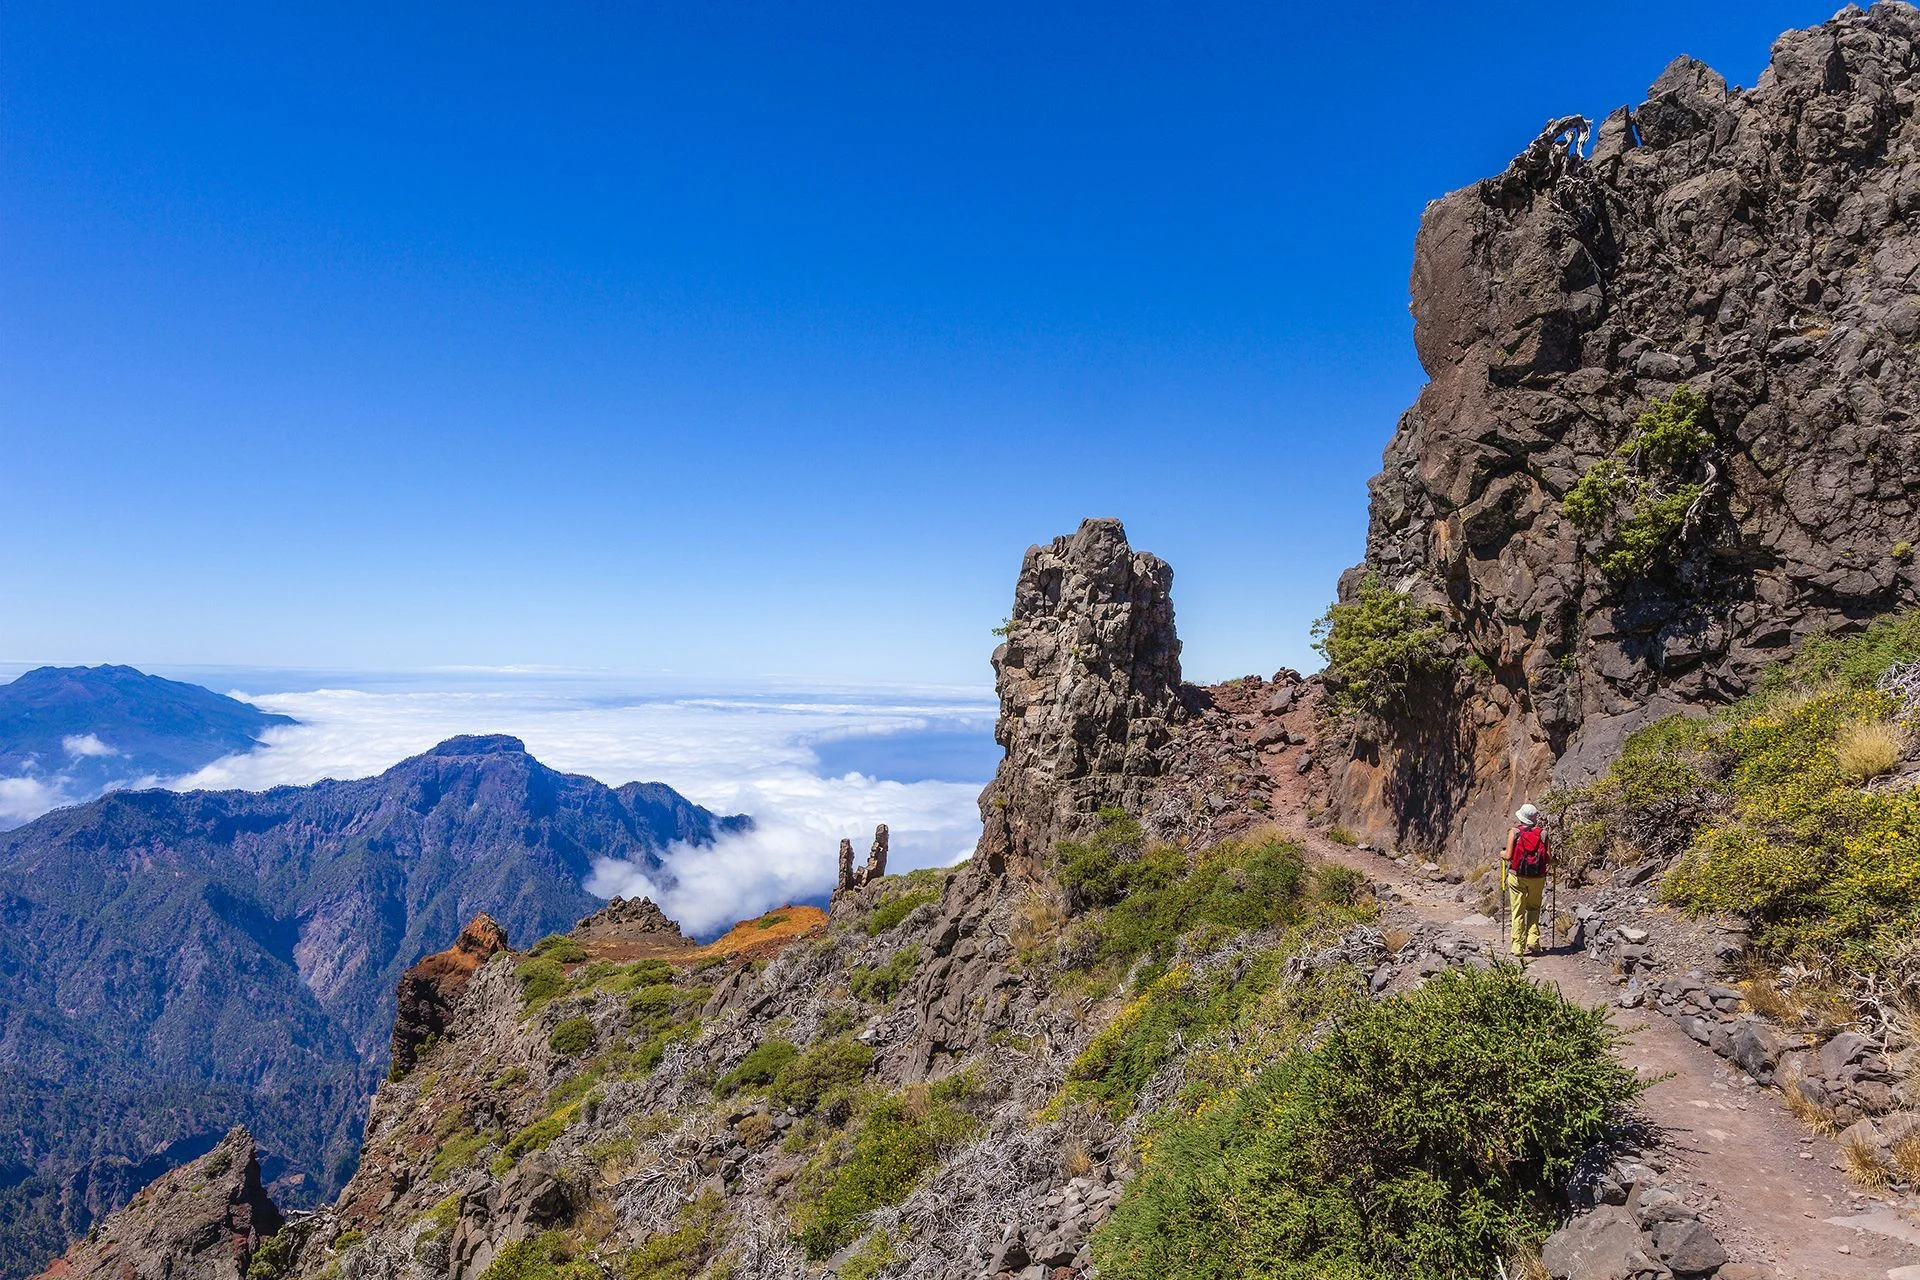 Calderea de Taburiente National Park in the Canary Islands is famed for its amazing views and hiking trails. Photo: Flavio Vallenari